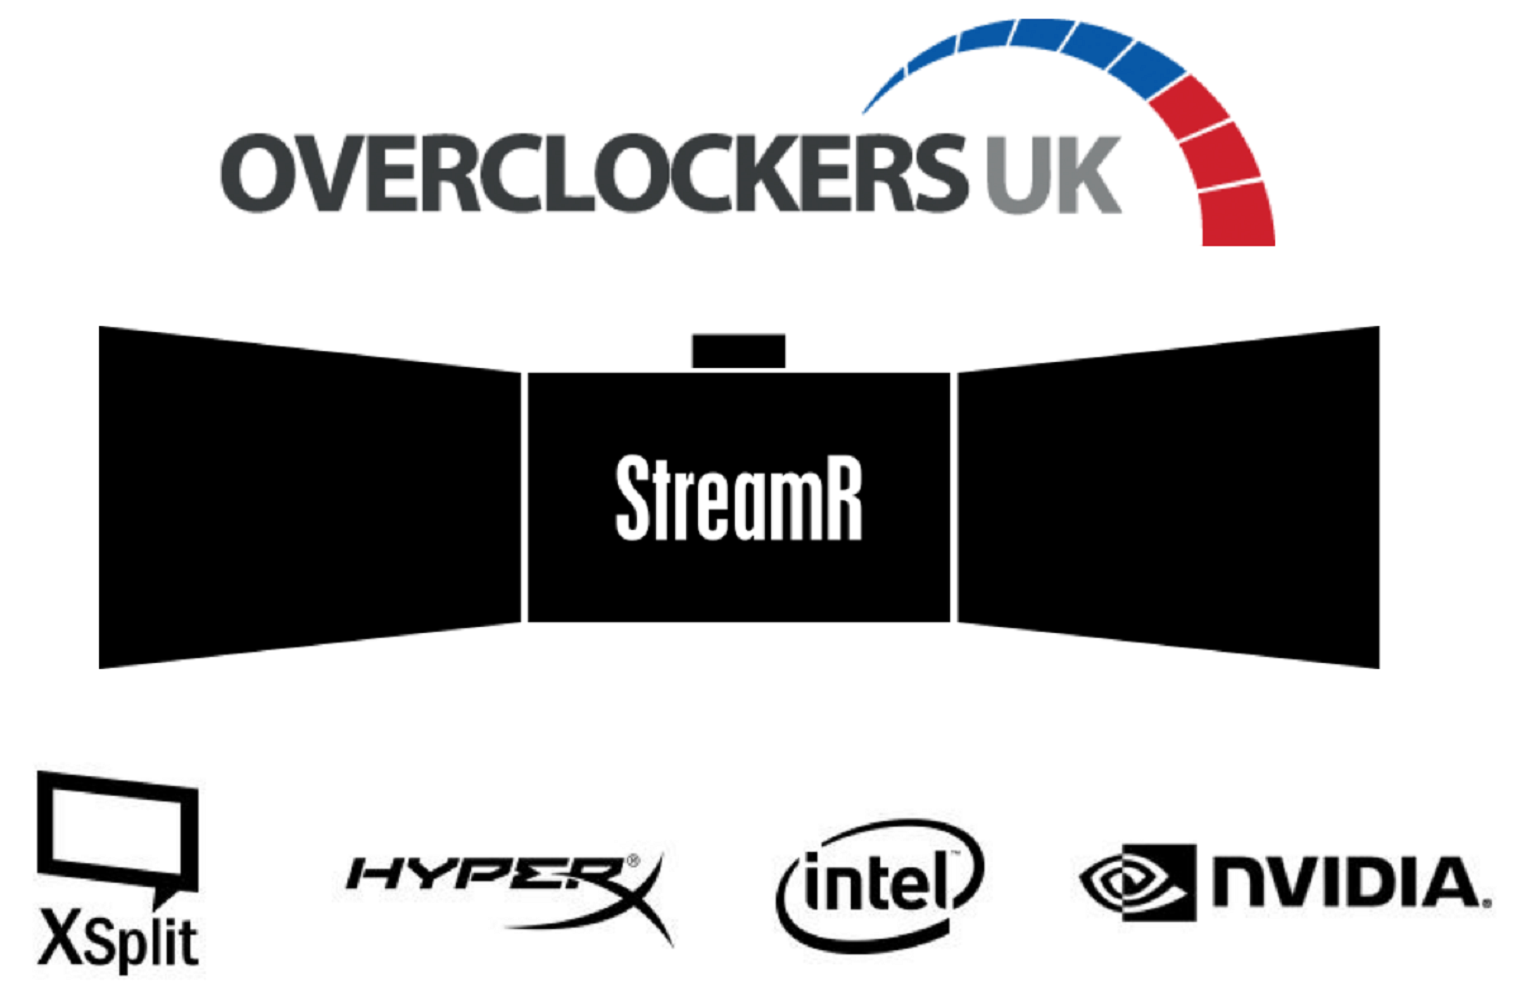 Overclockers UK introduce new StreamR systems | Play3r